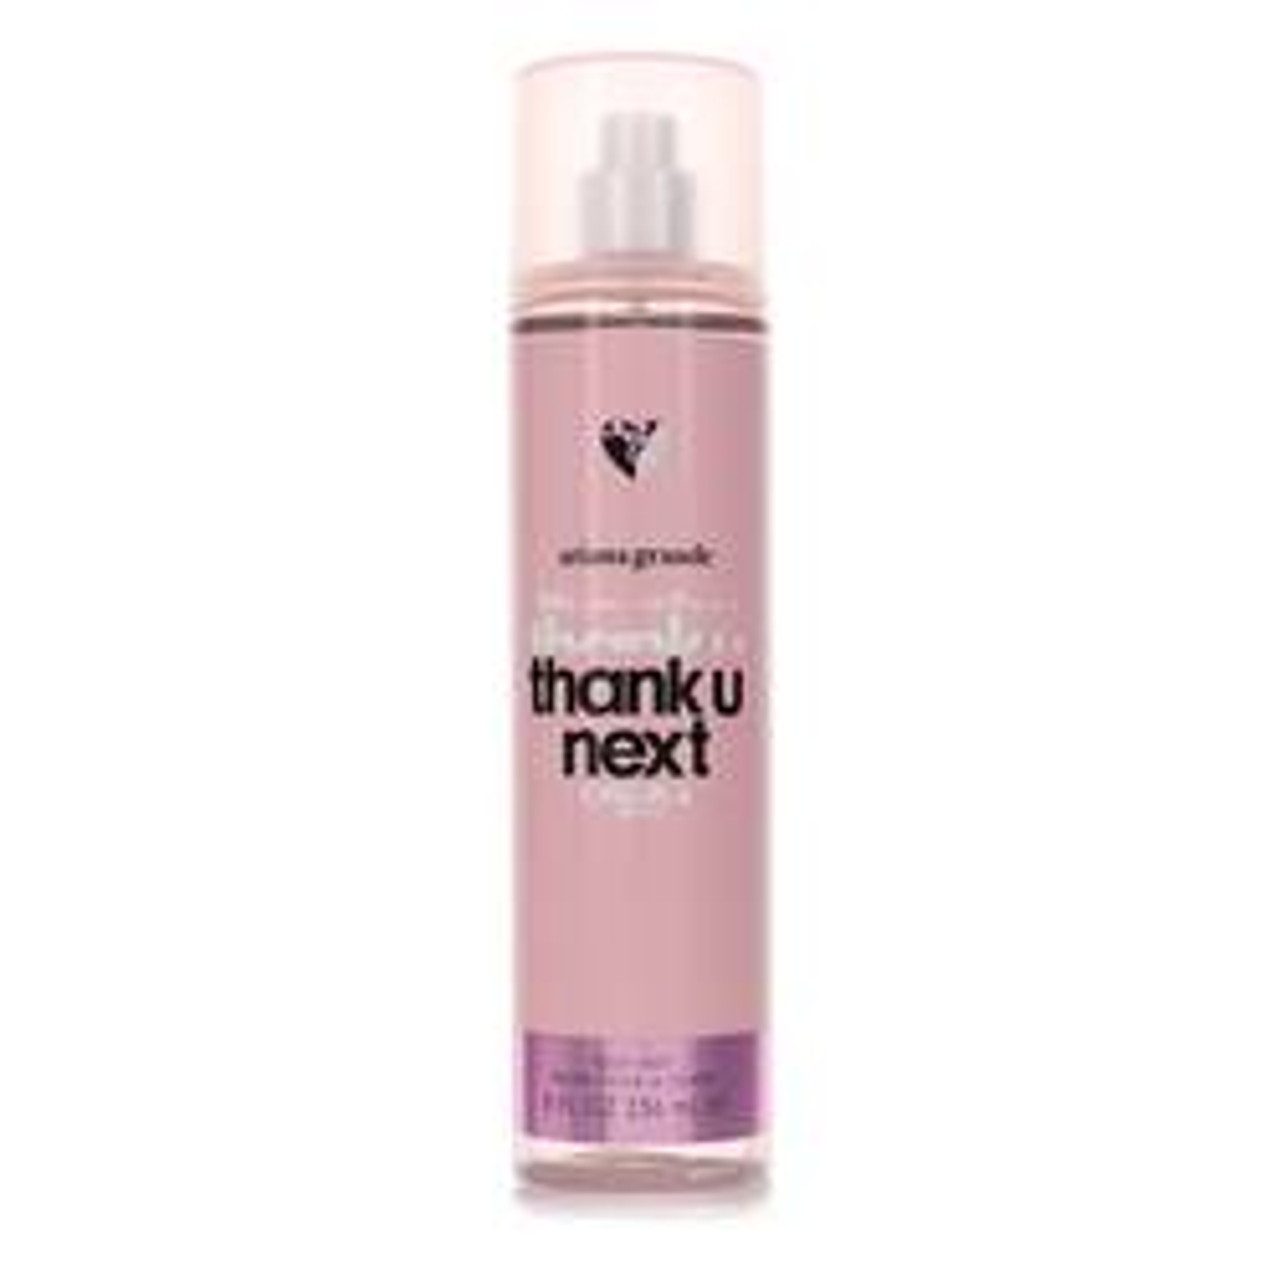 Ariana Grande Thank U, Next Perfume By Ariana Grande Body Mist 8 oz for Women - [From 76.00 - Choose pk Qty ] - *Ships from Miami